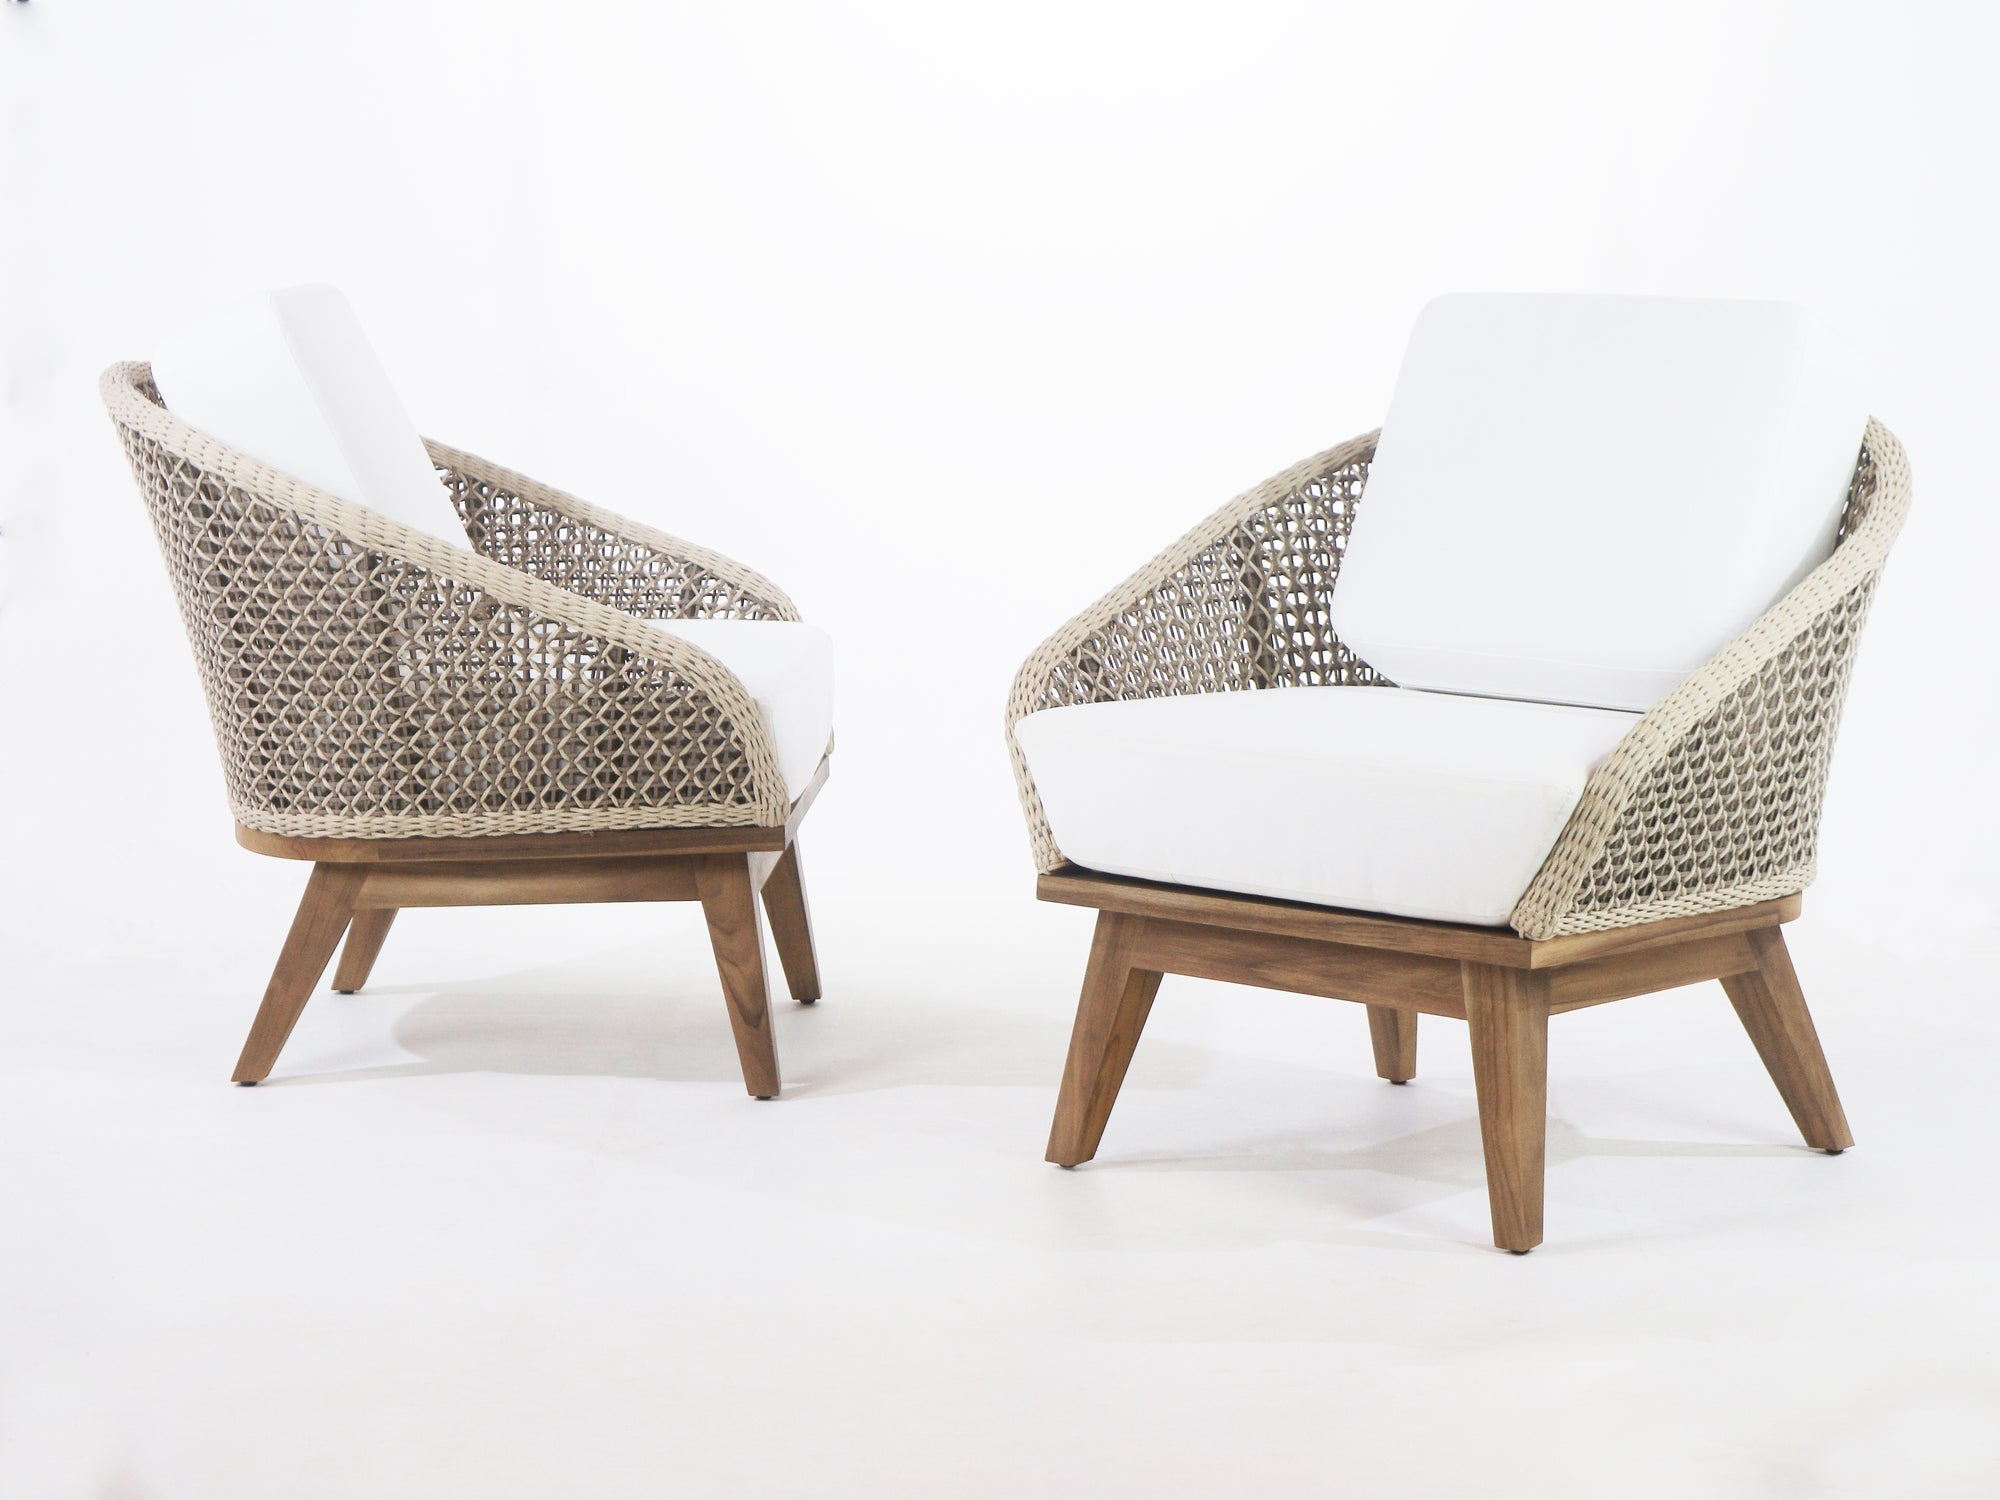 Surakarta Outdoor Accent Chair with UV protected outdoor weaving - INTERIORTONIC